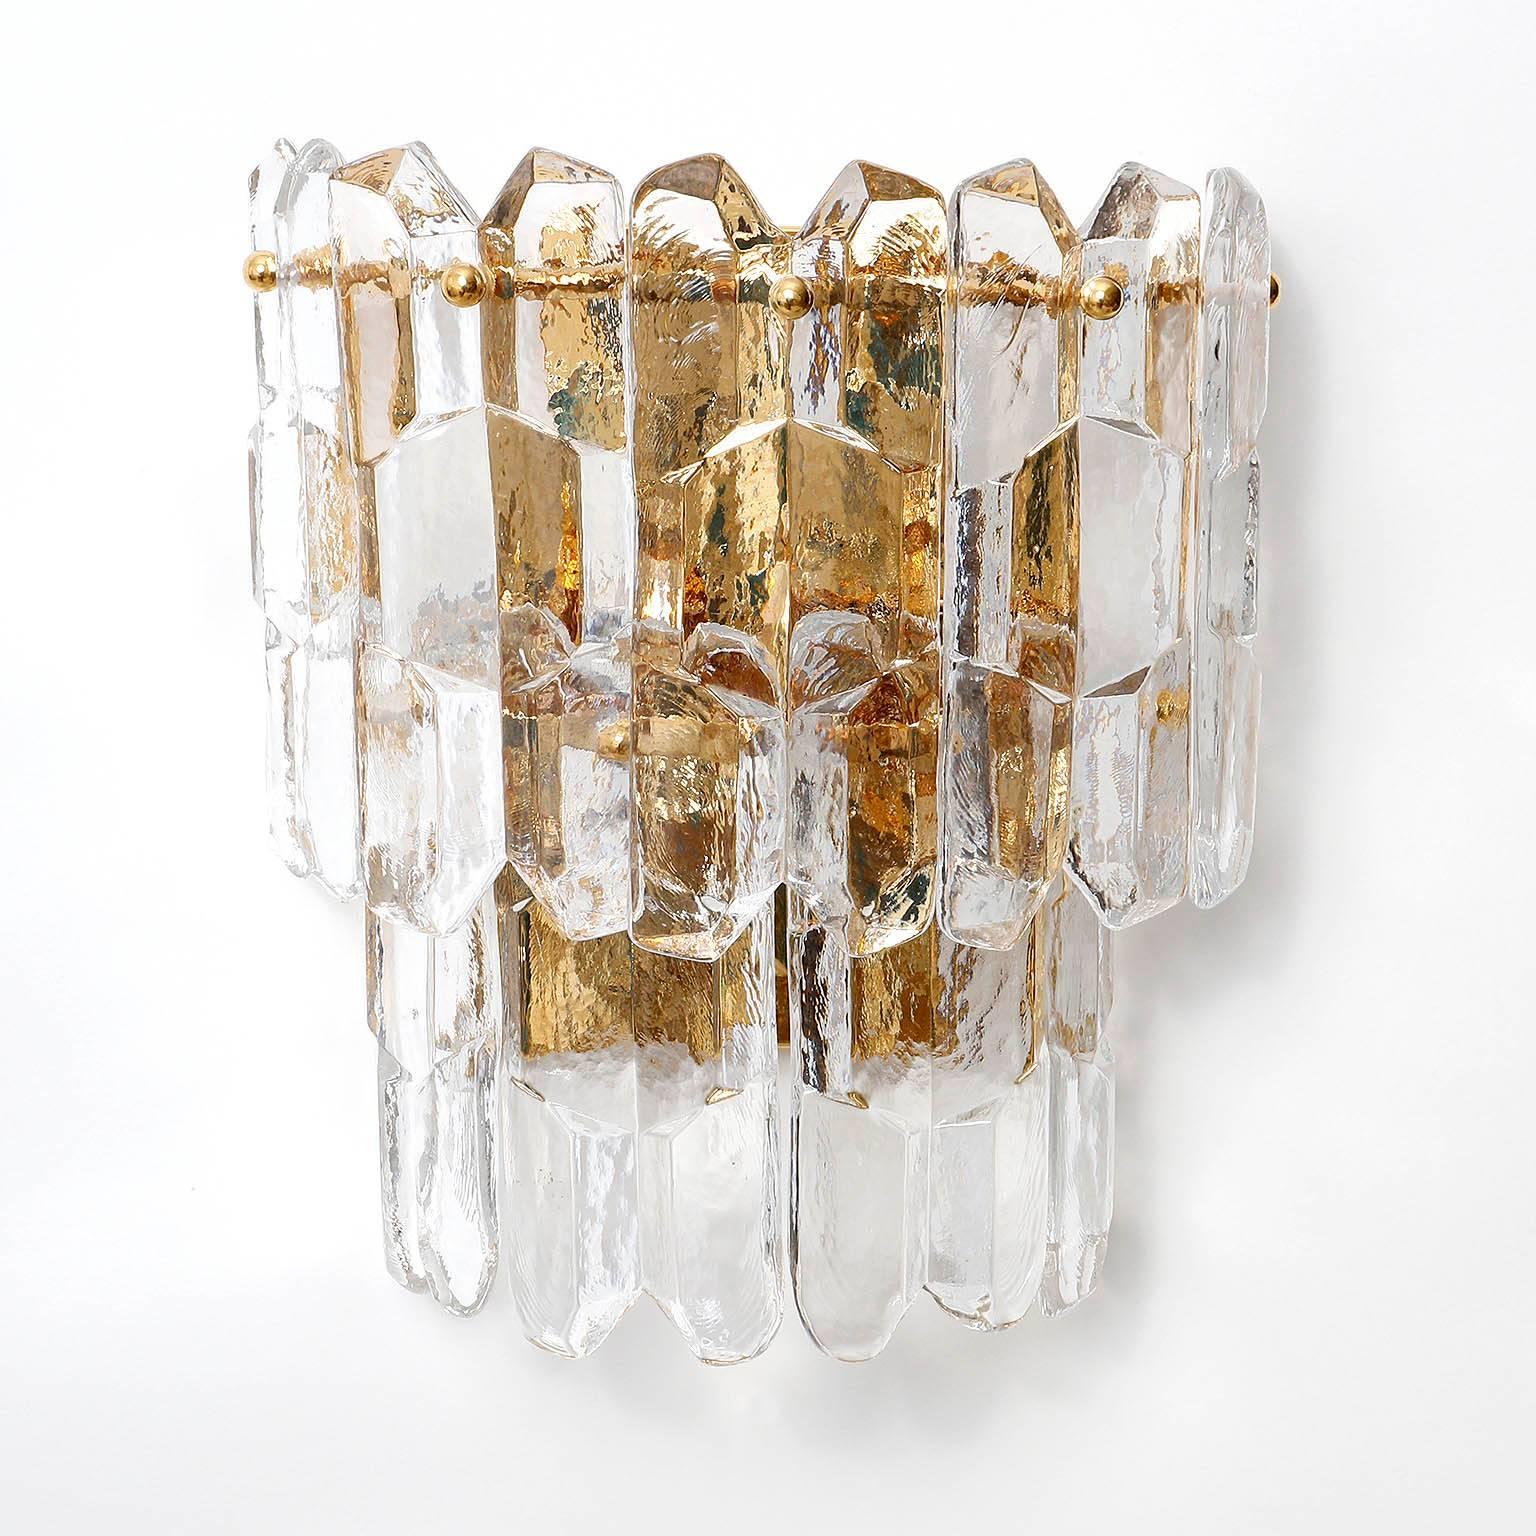 A pair of very exquisit 24-carat gold-plated brass and clear brilliant glass 'Palazzo' wall lights by J.T. Kalmar, Vienna, Austria, manufactured in circa 1970 (late 1960s and early 1970s).
These large Hollywood Regency lamps are handmade and high